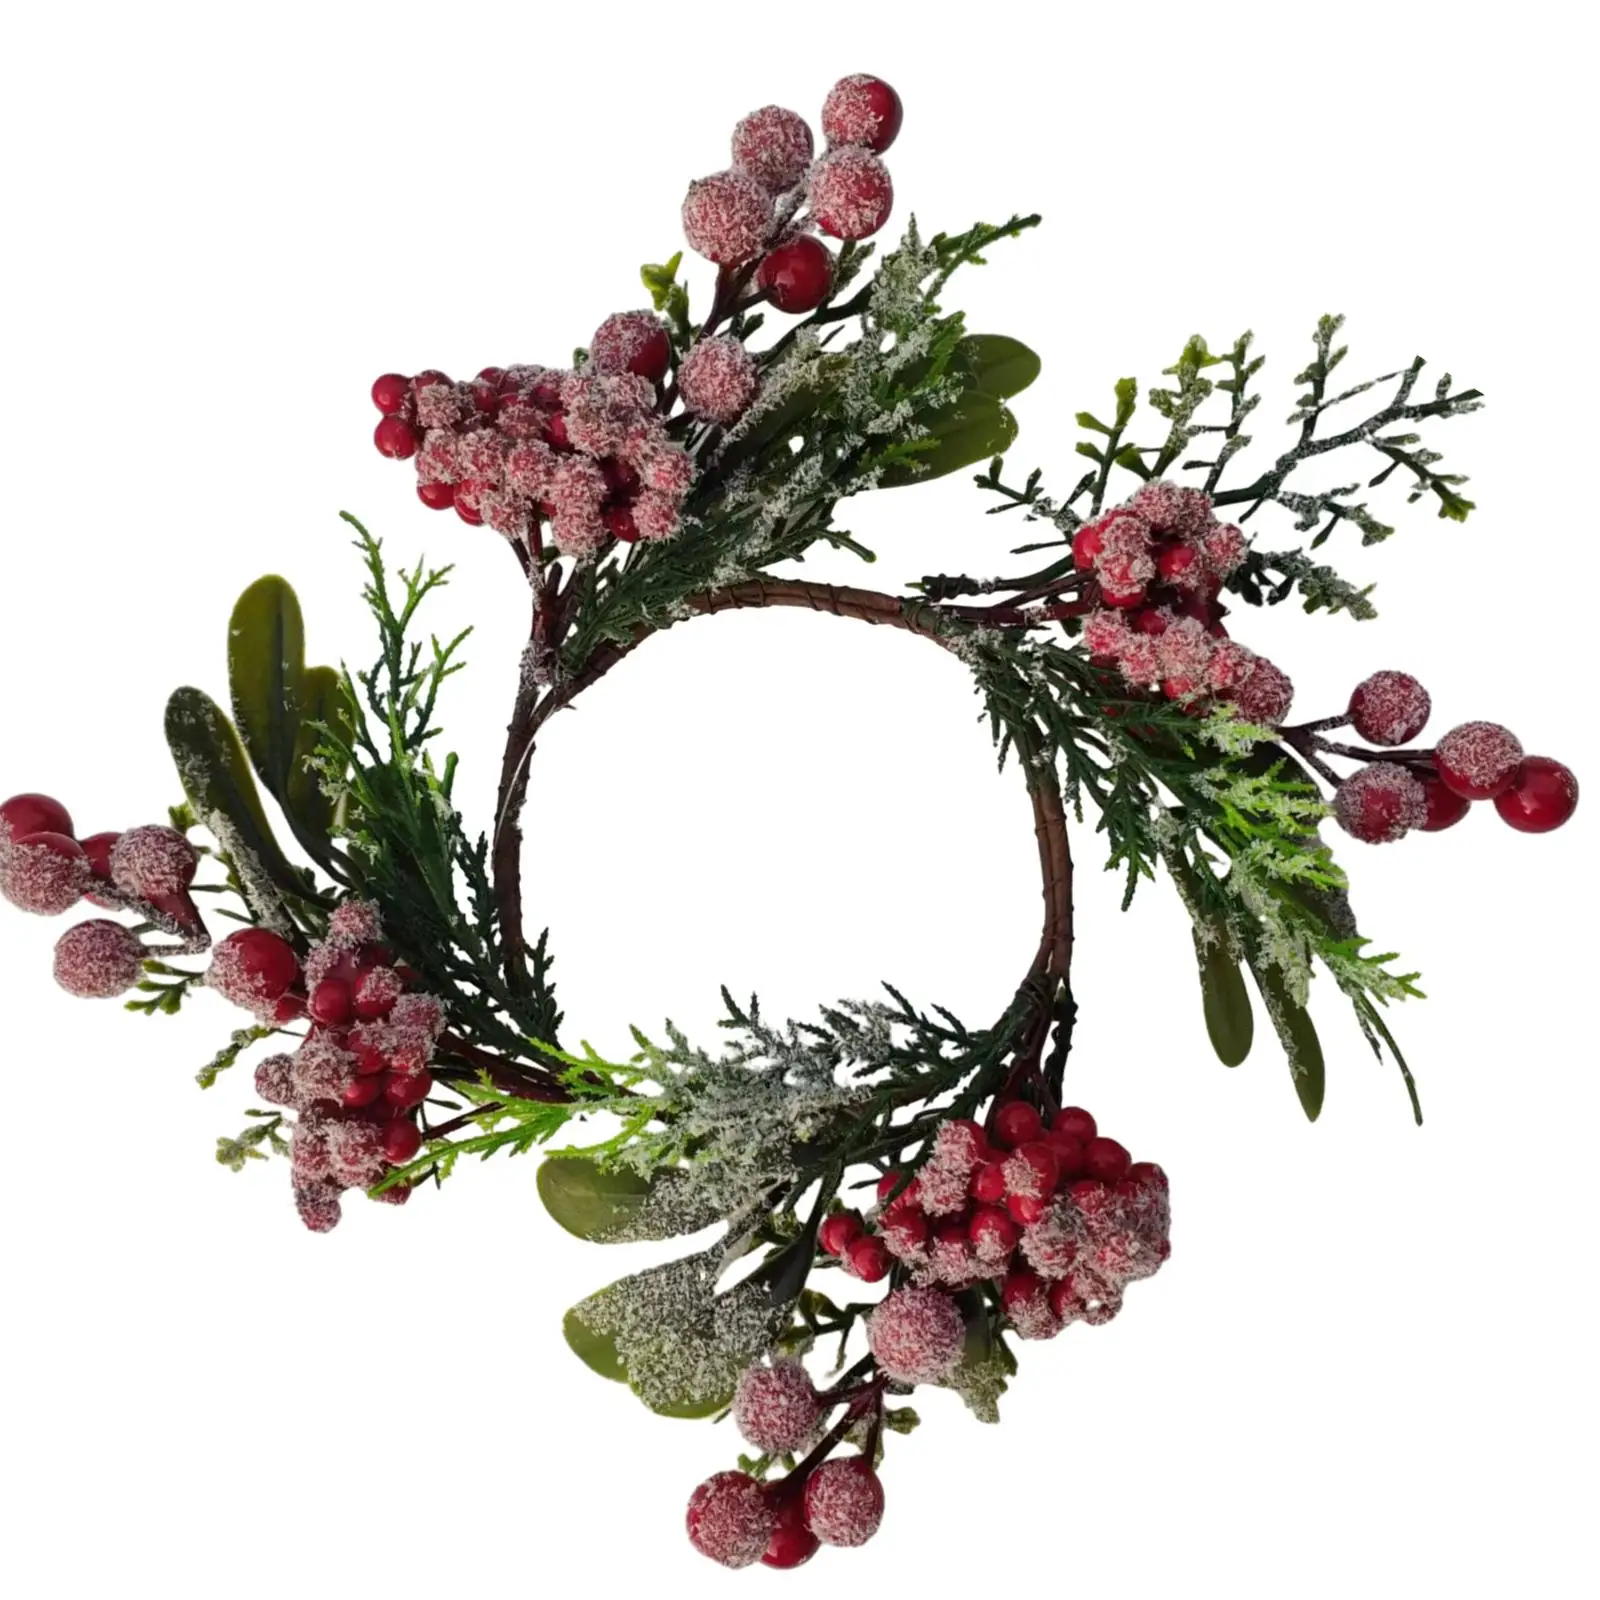 Candle Garland Ring Christmas Decoration Ornament Holiday Party Decor Artificial Christmas Wreath for Window Indoor Home Decor